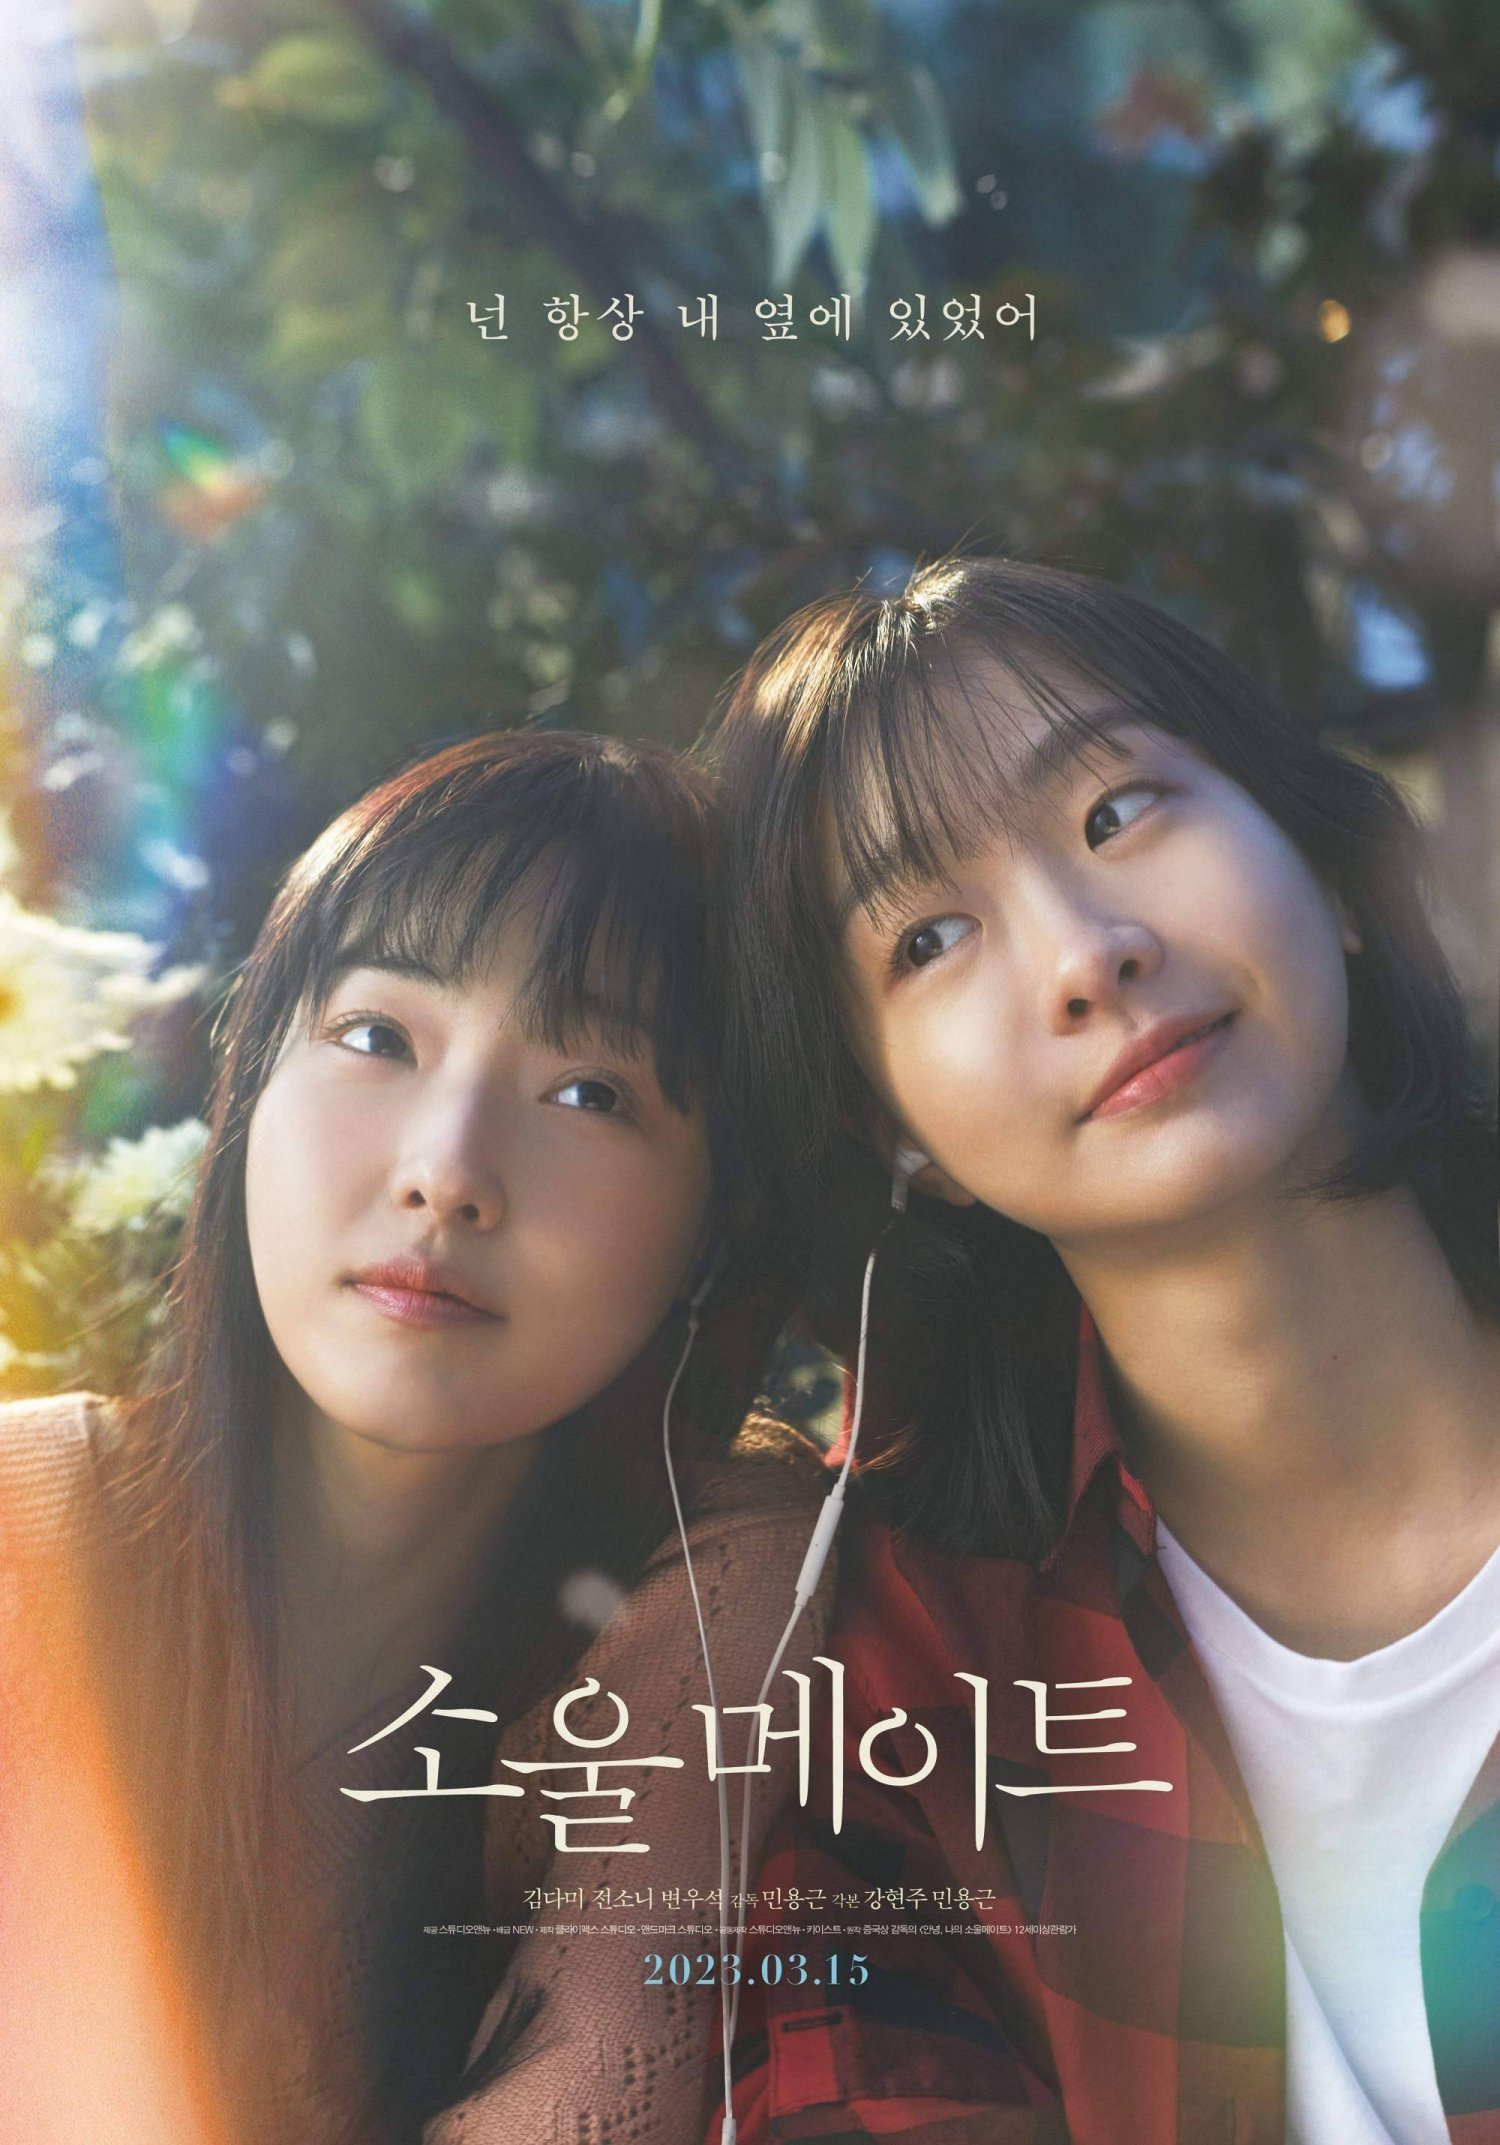 Soulmate Movie (2023) Cast, Release Date, Story, Budget, Collection, Poster, Trailer, Review
